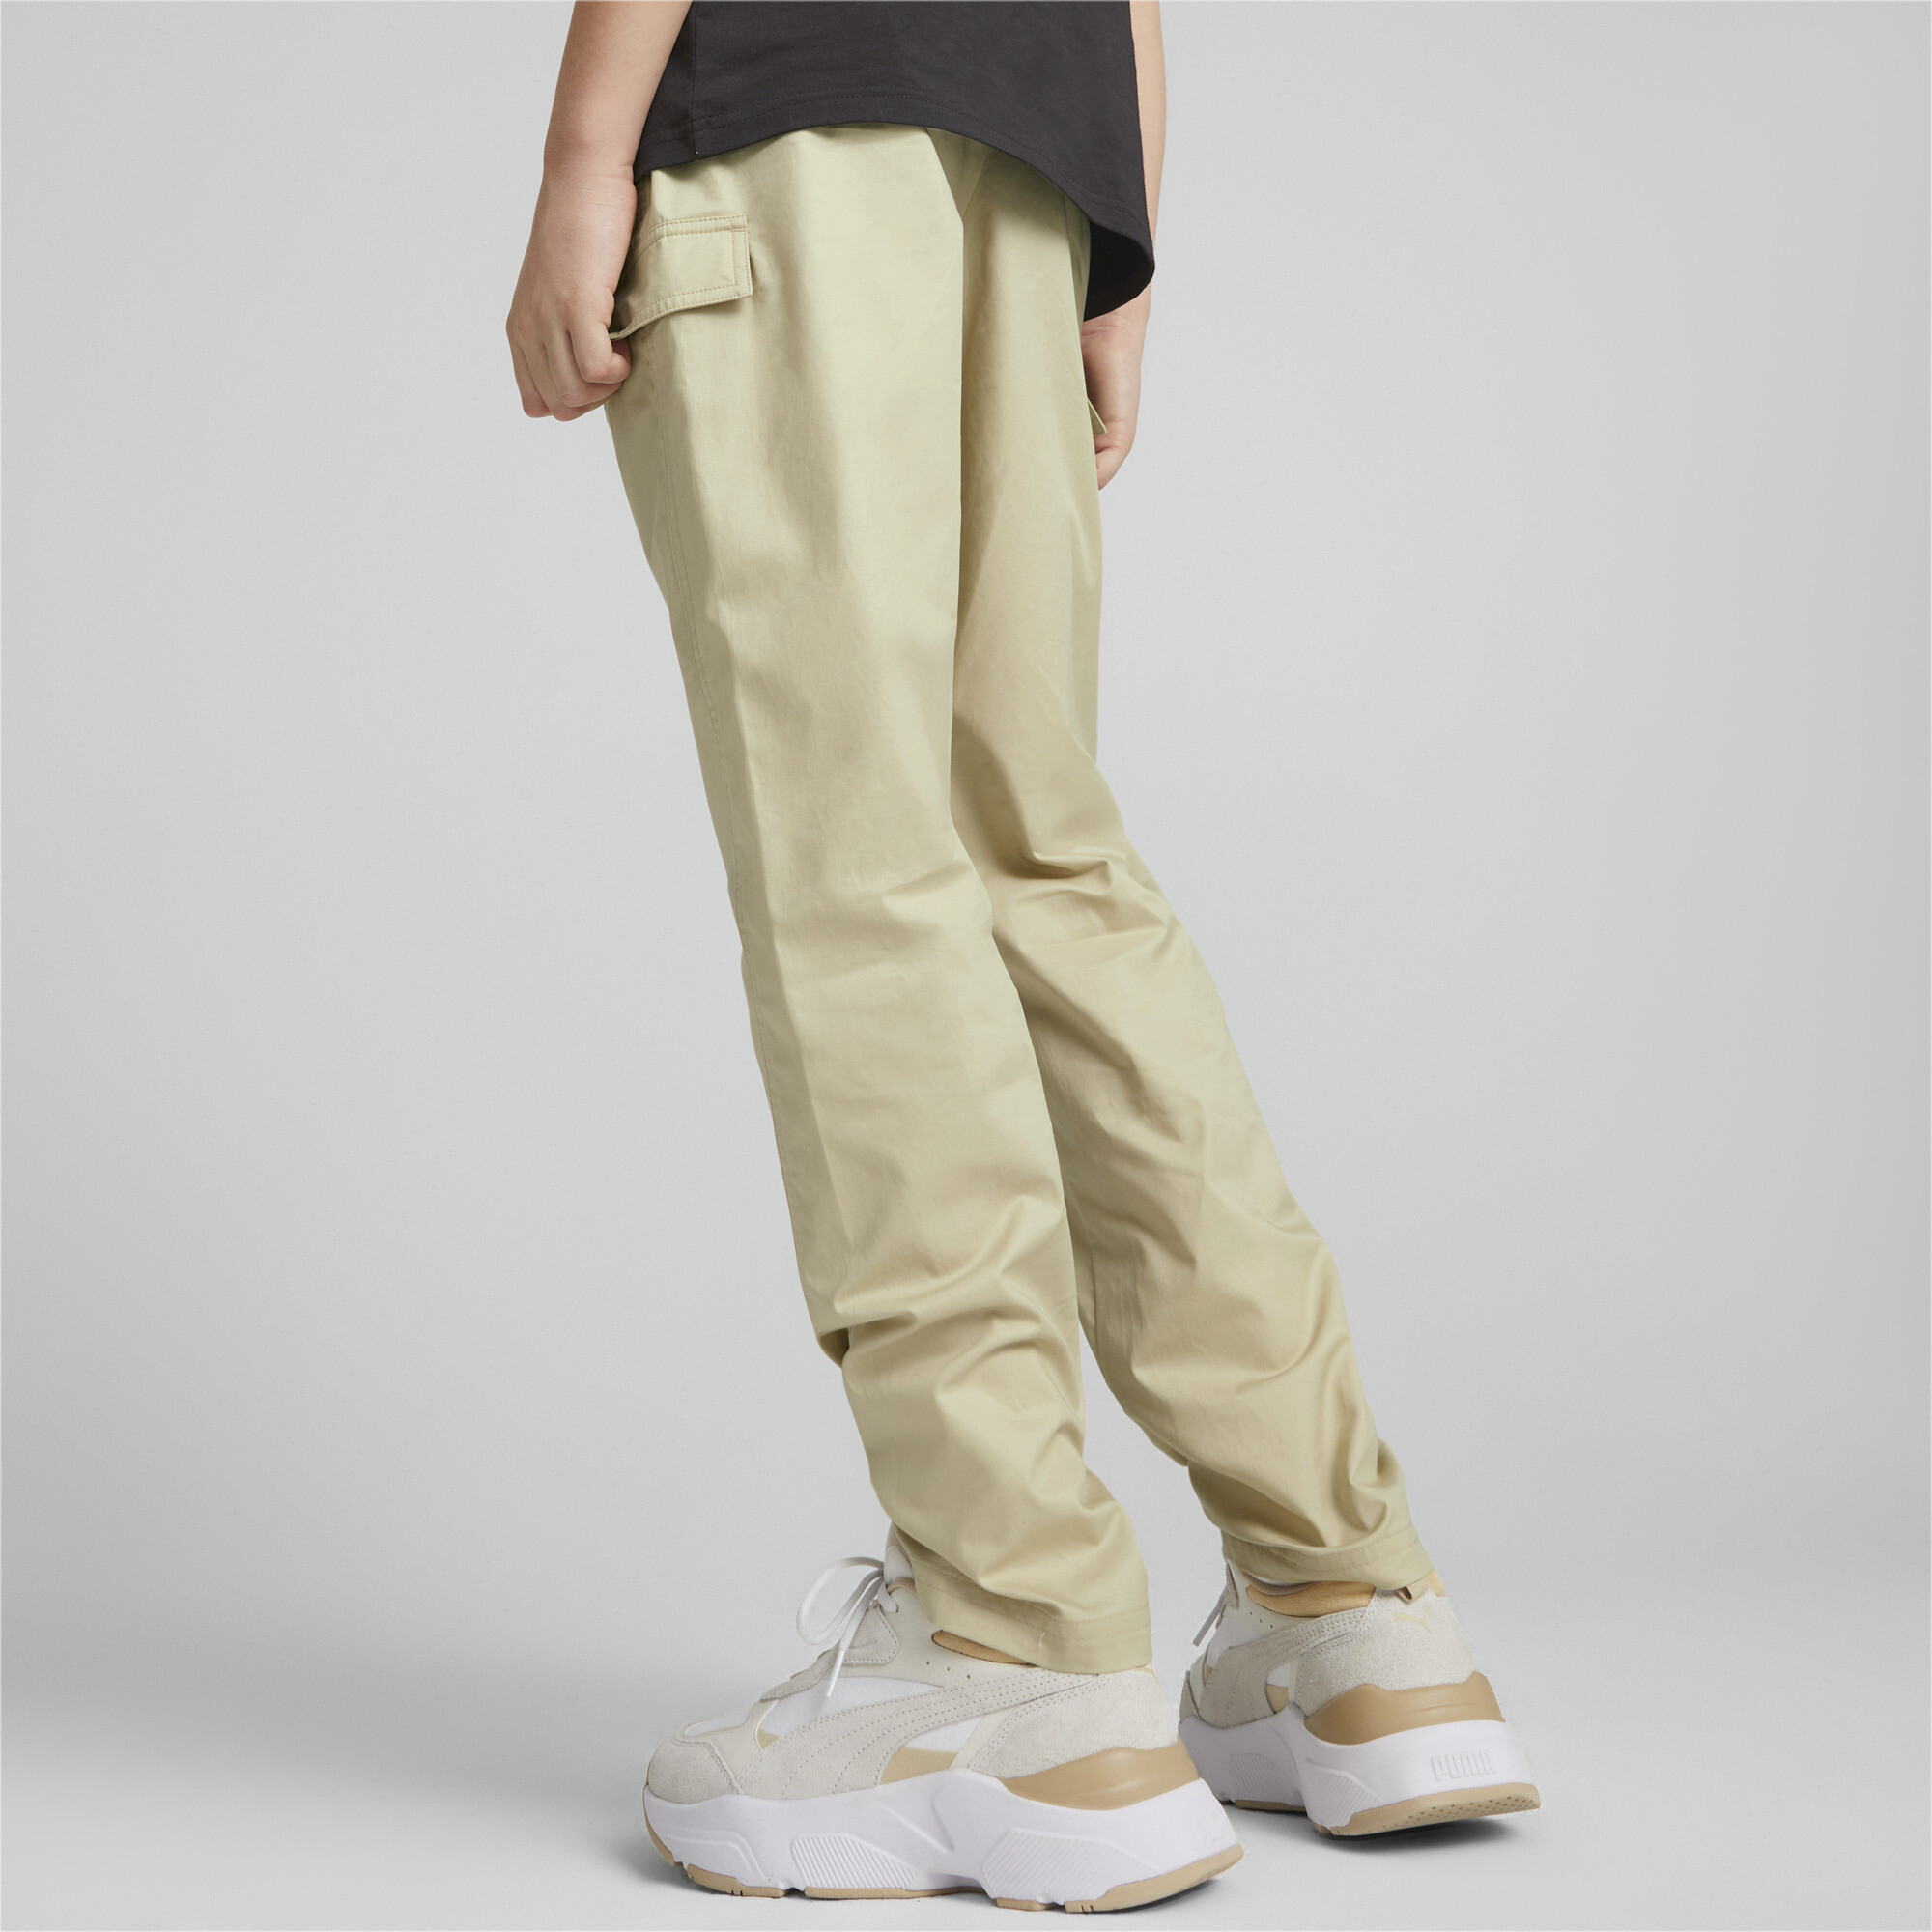 Puma Classics Woven Sweatpants Youth, Beige, Size 3-4Y, Clothing